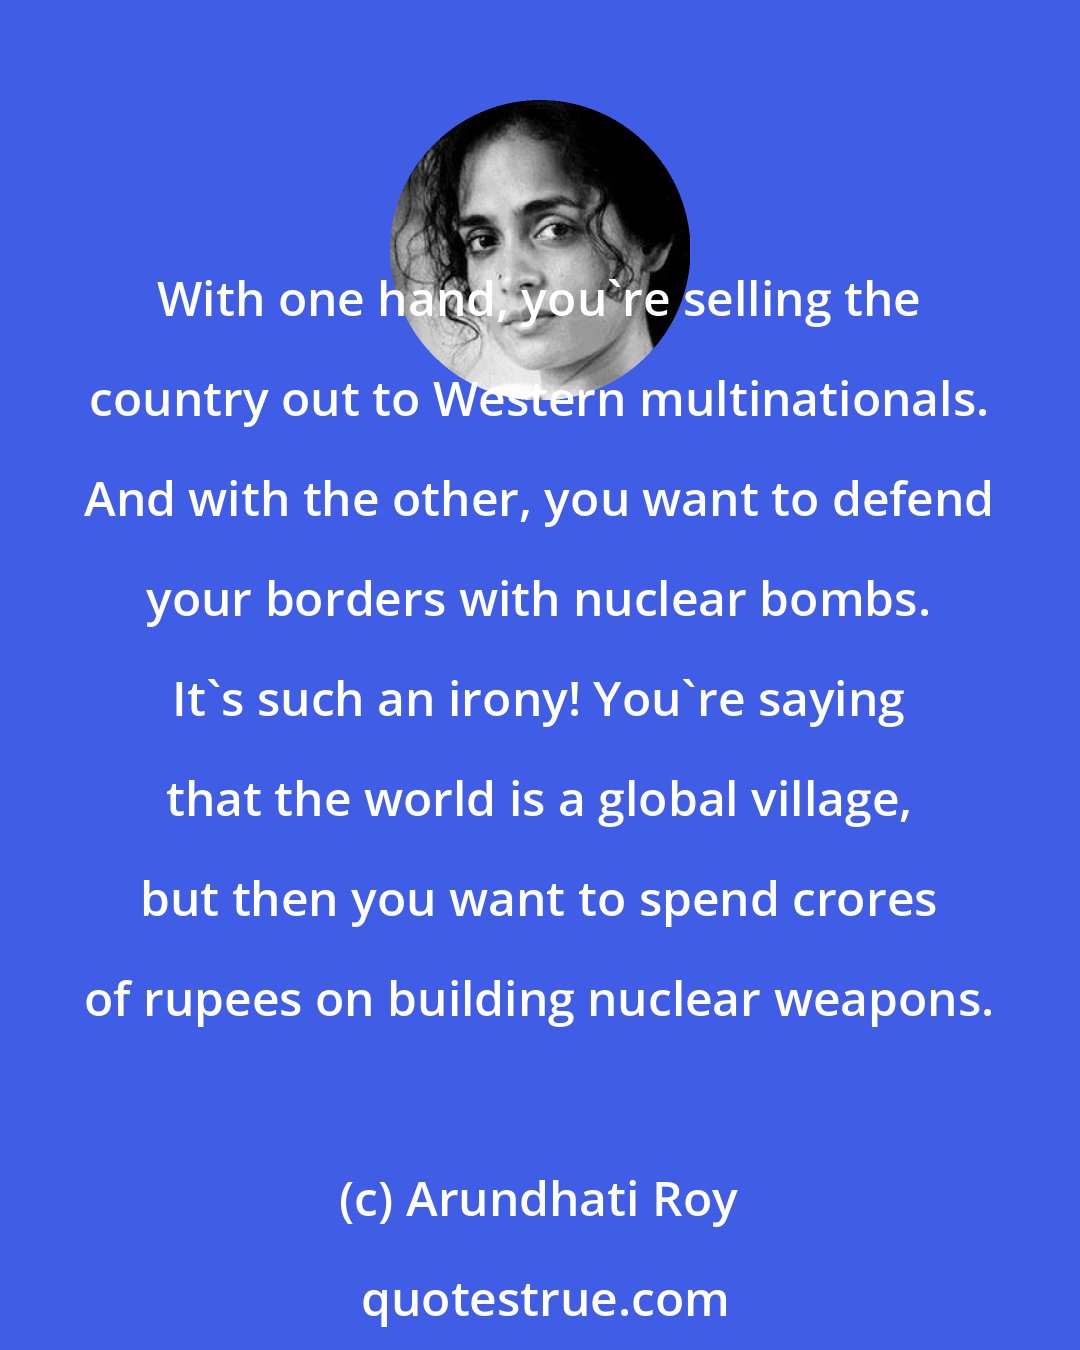 Arundhati Roy: With one hand, you're selling the country out to Western multinationals. And with the other, you want to defend your borders with nuclear bombs. It's such an irony! You're saying that the world is a global village, but then you want to spend crores of rupees on building nuclear weapons.